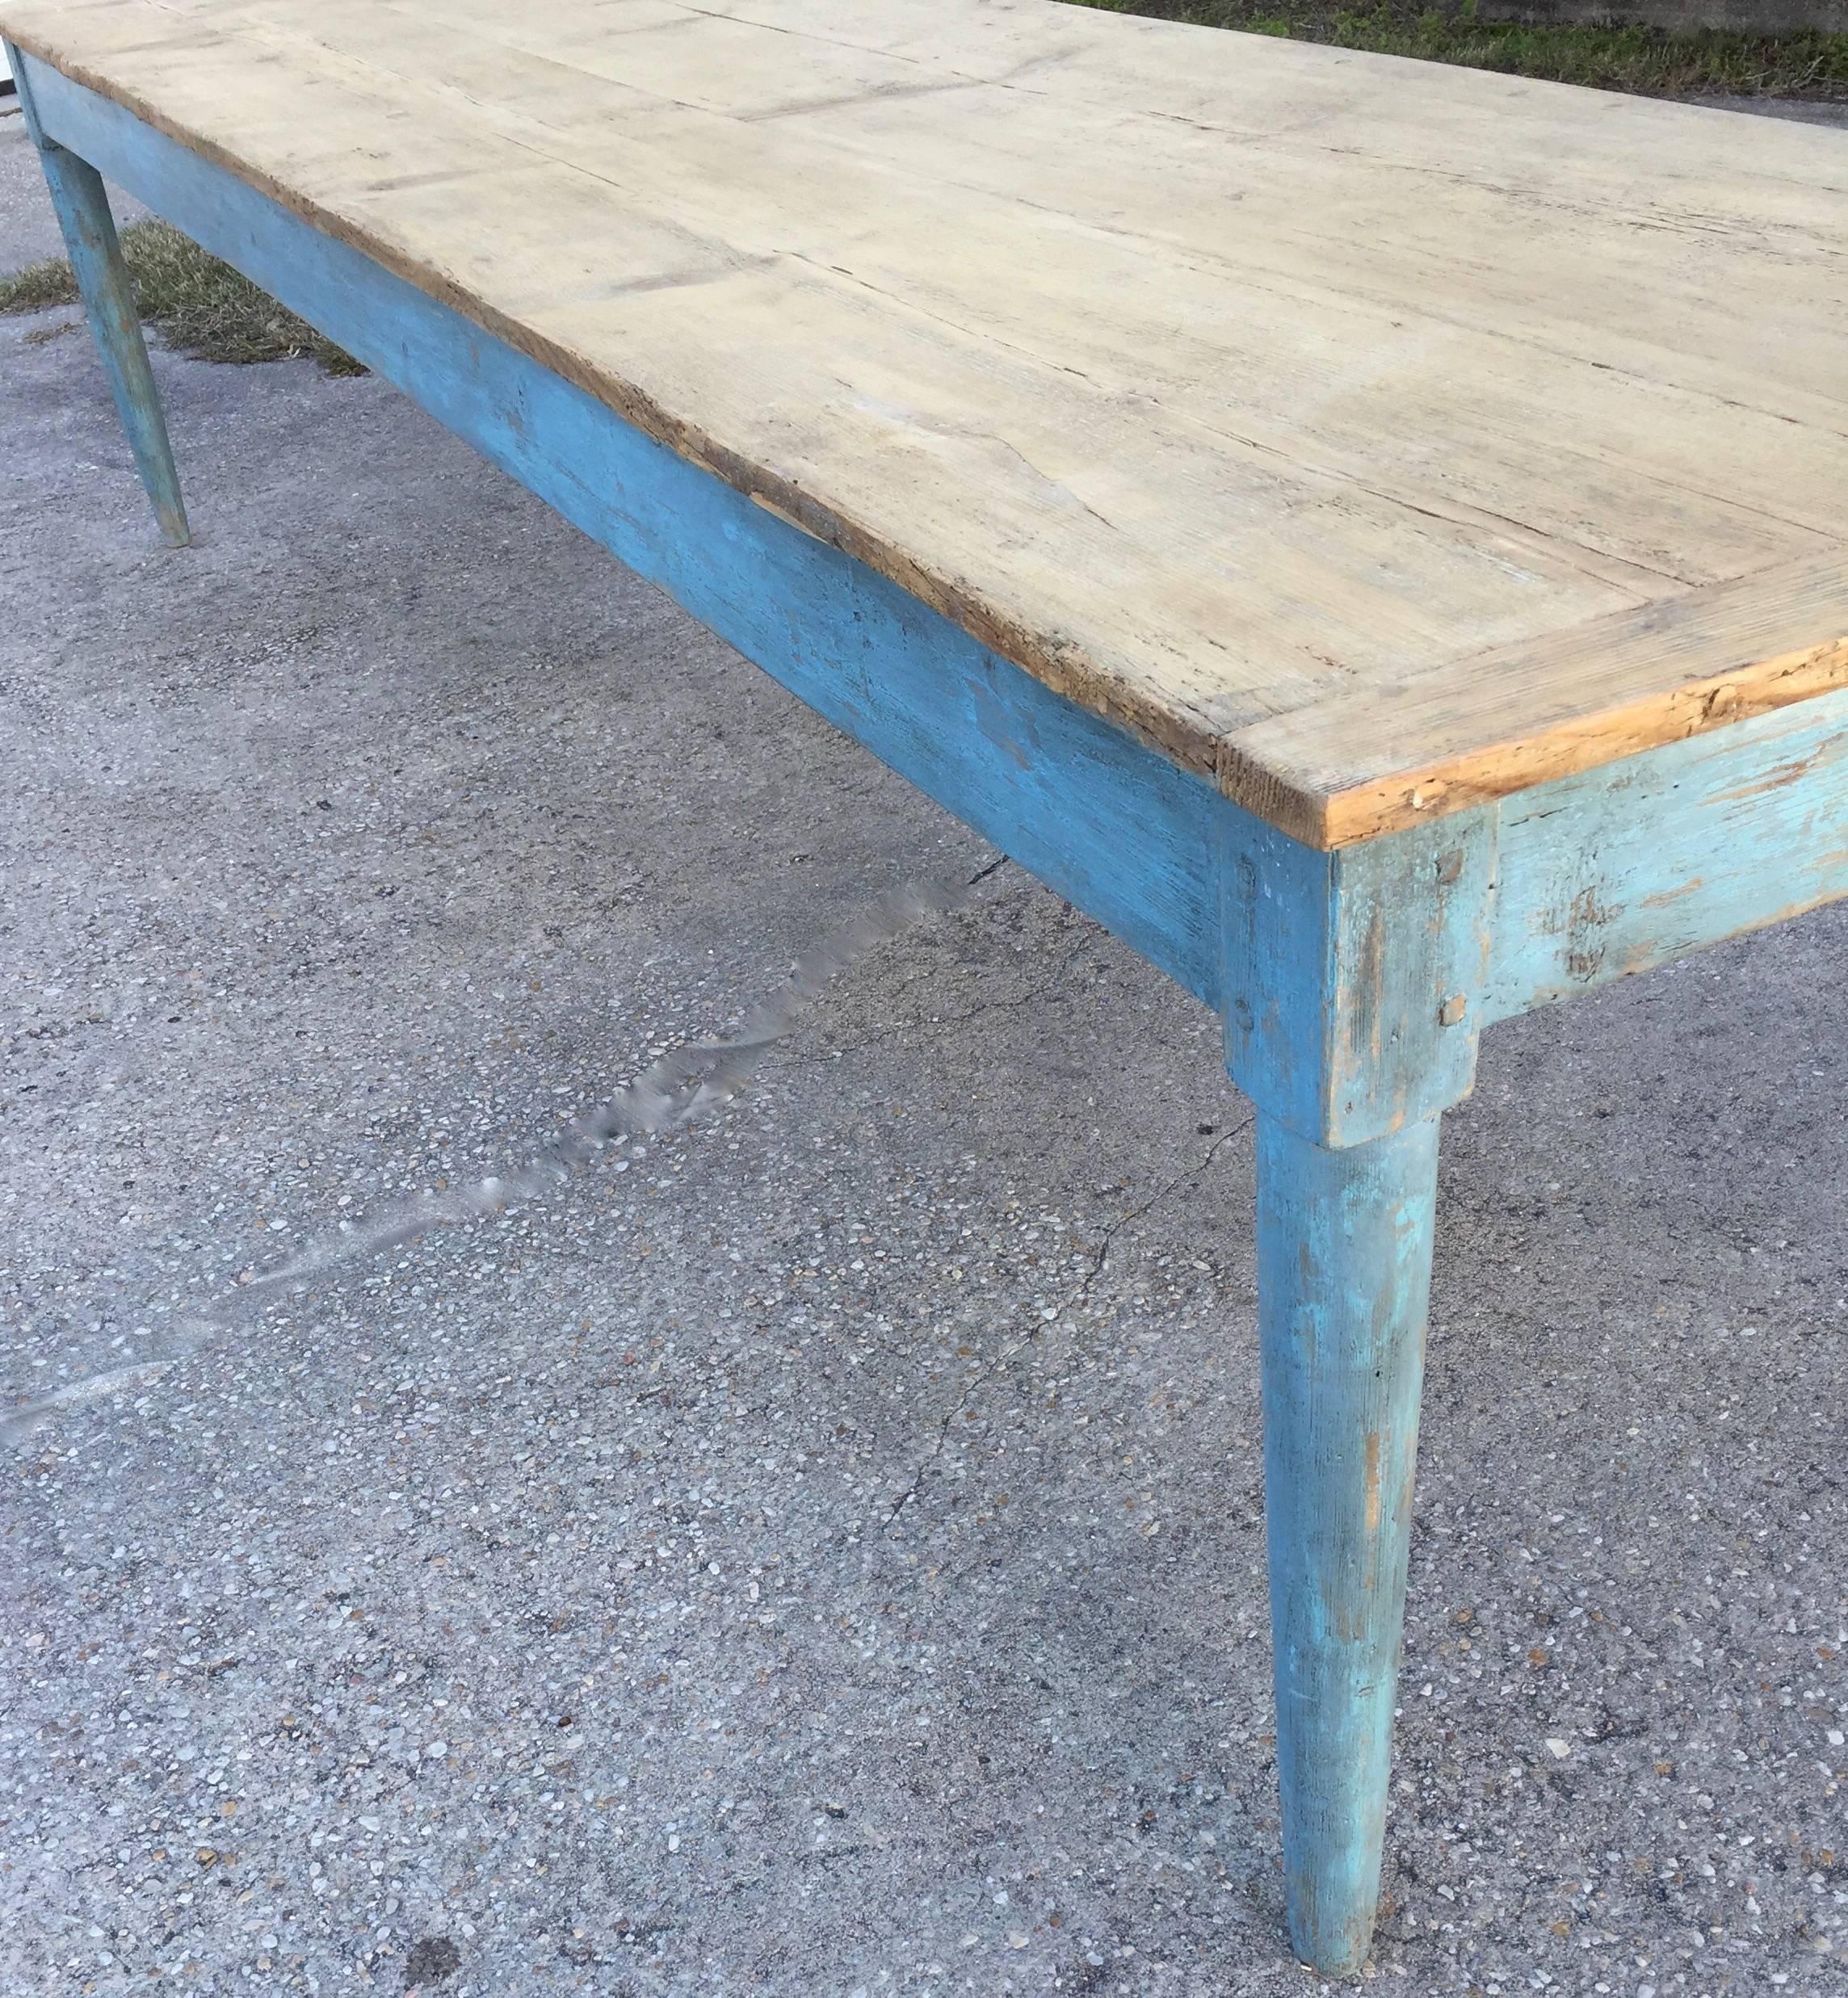 Huge French country table in brilliant color and patina base and nicely, charming patinated pine top,
France, late 19th century.

Surprising pieces and objects, authentic, decorative and rare items. Discover them all.